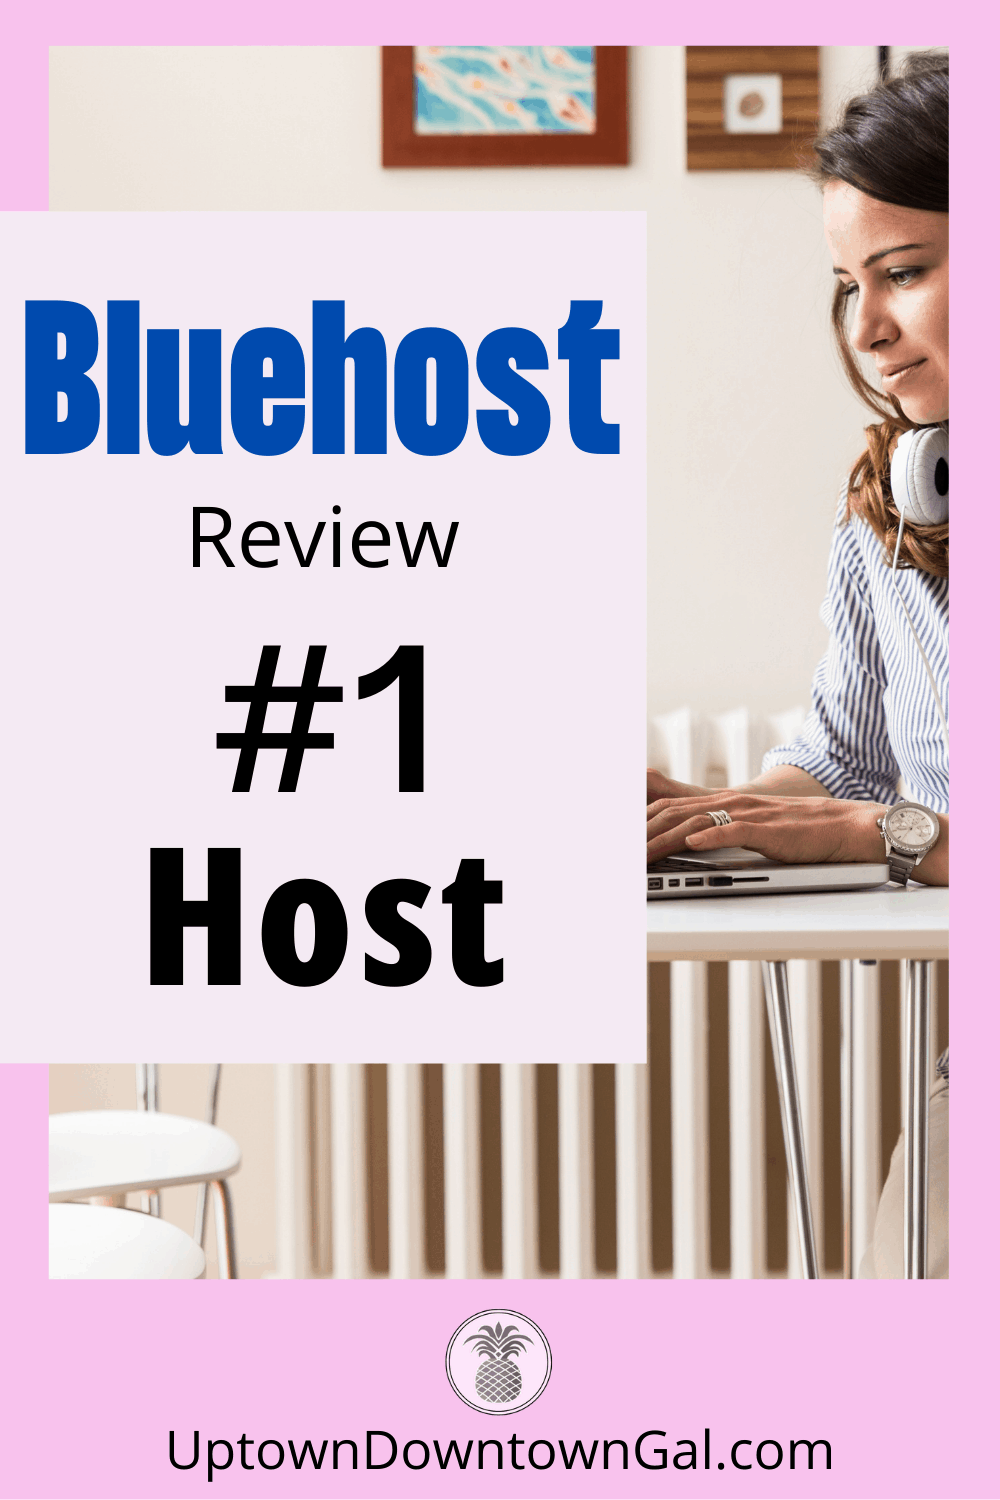 Bluehost Review #1 Host